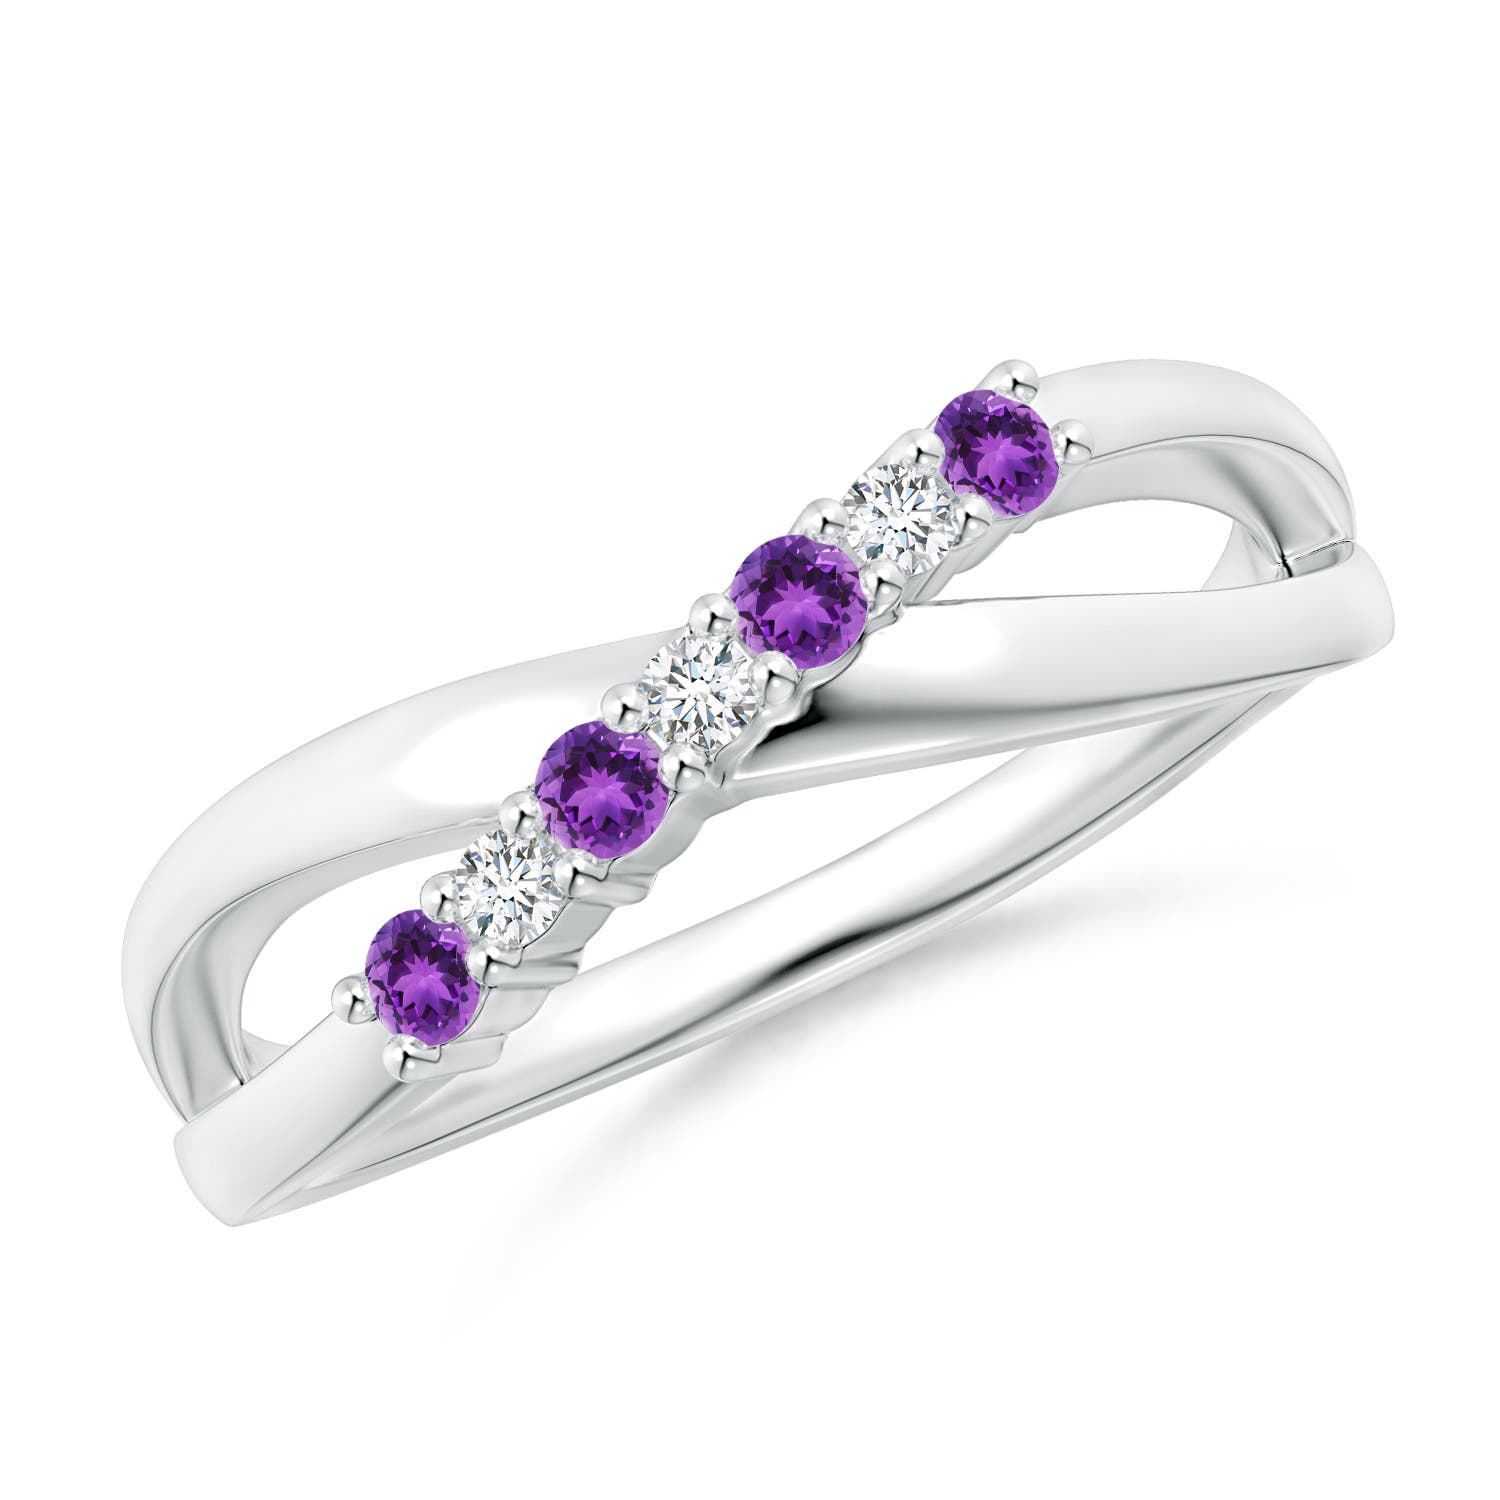 AAA - Amethyst / 0.18 CT / 14 KT White Gold